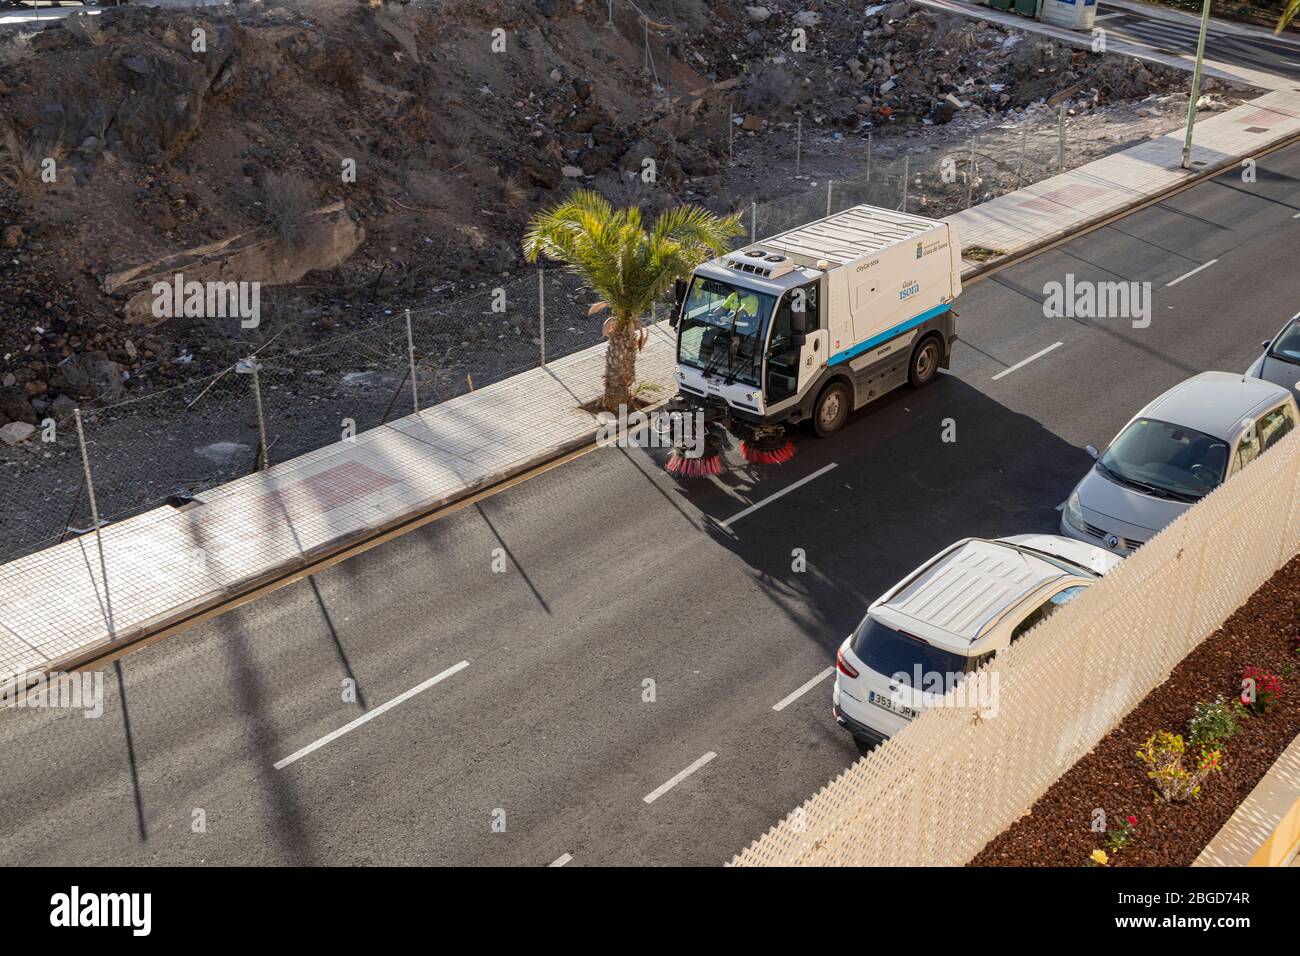 Street sweeper machine cleaning the streets during the covid 19 pandemic, Playa San Juan, Tenerife, Canary Islands, Spain Stock Photo